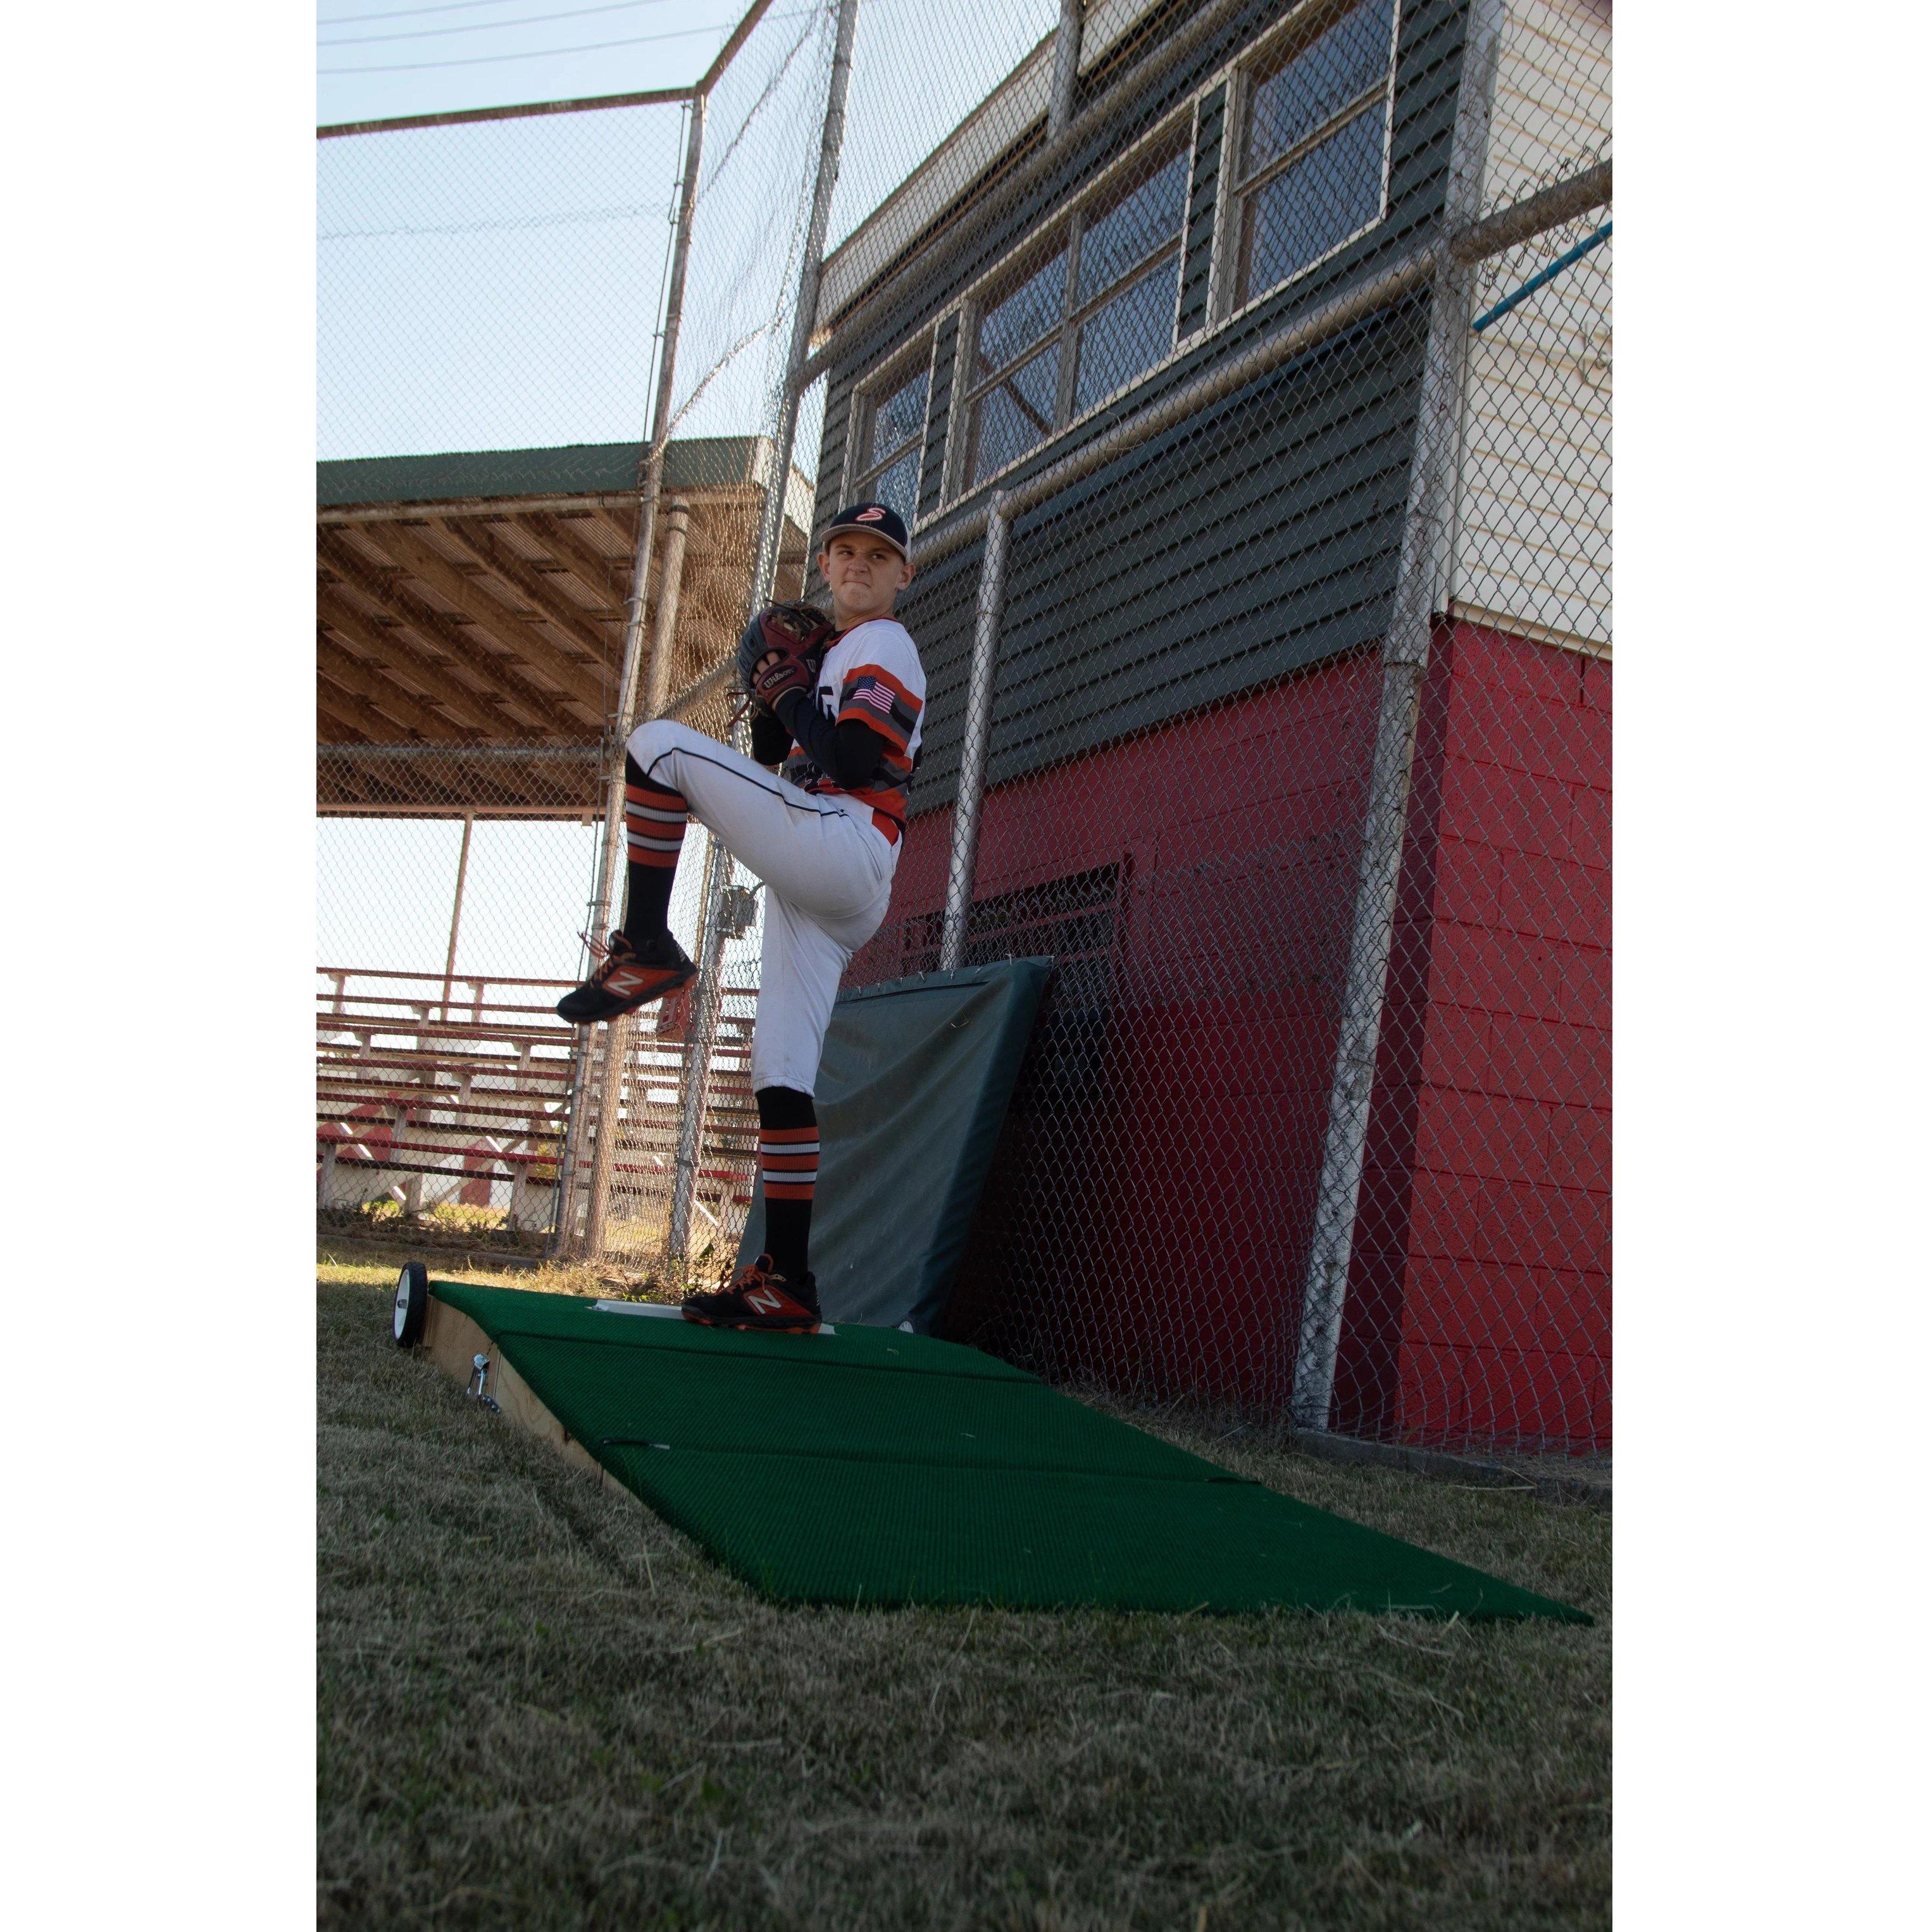 8" Extra Wide Portable Pitching Mound